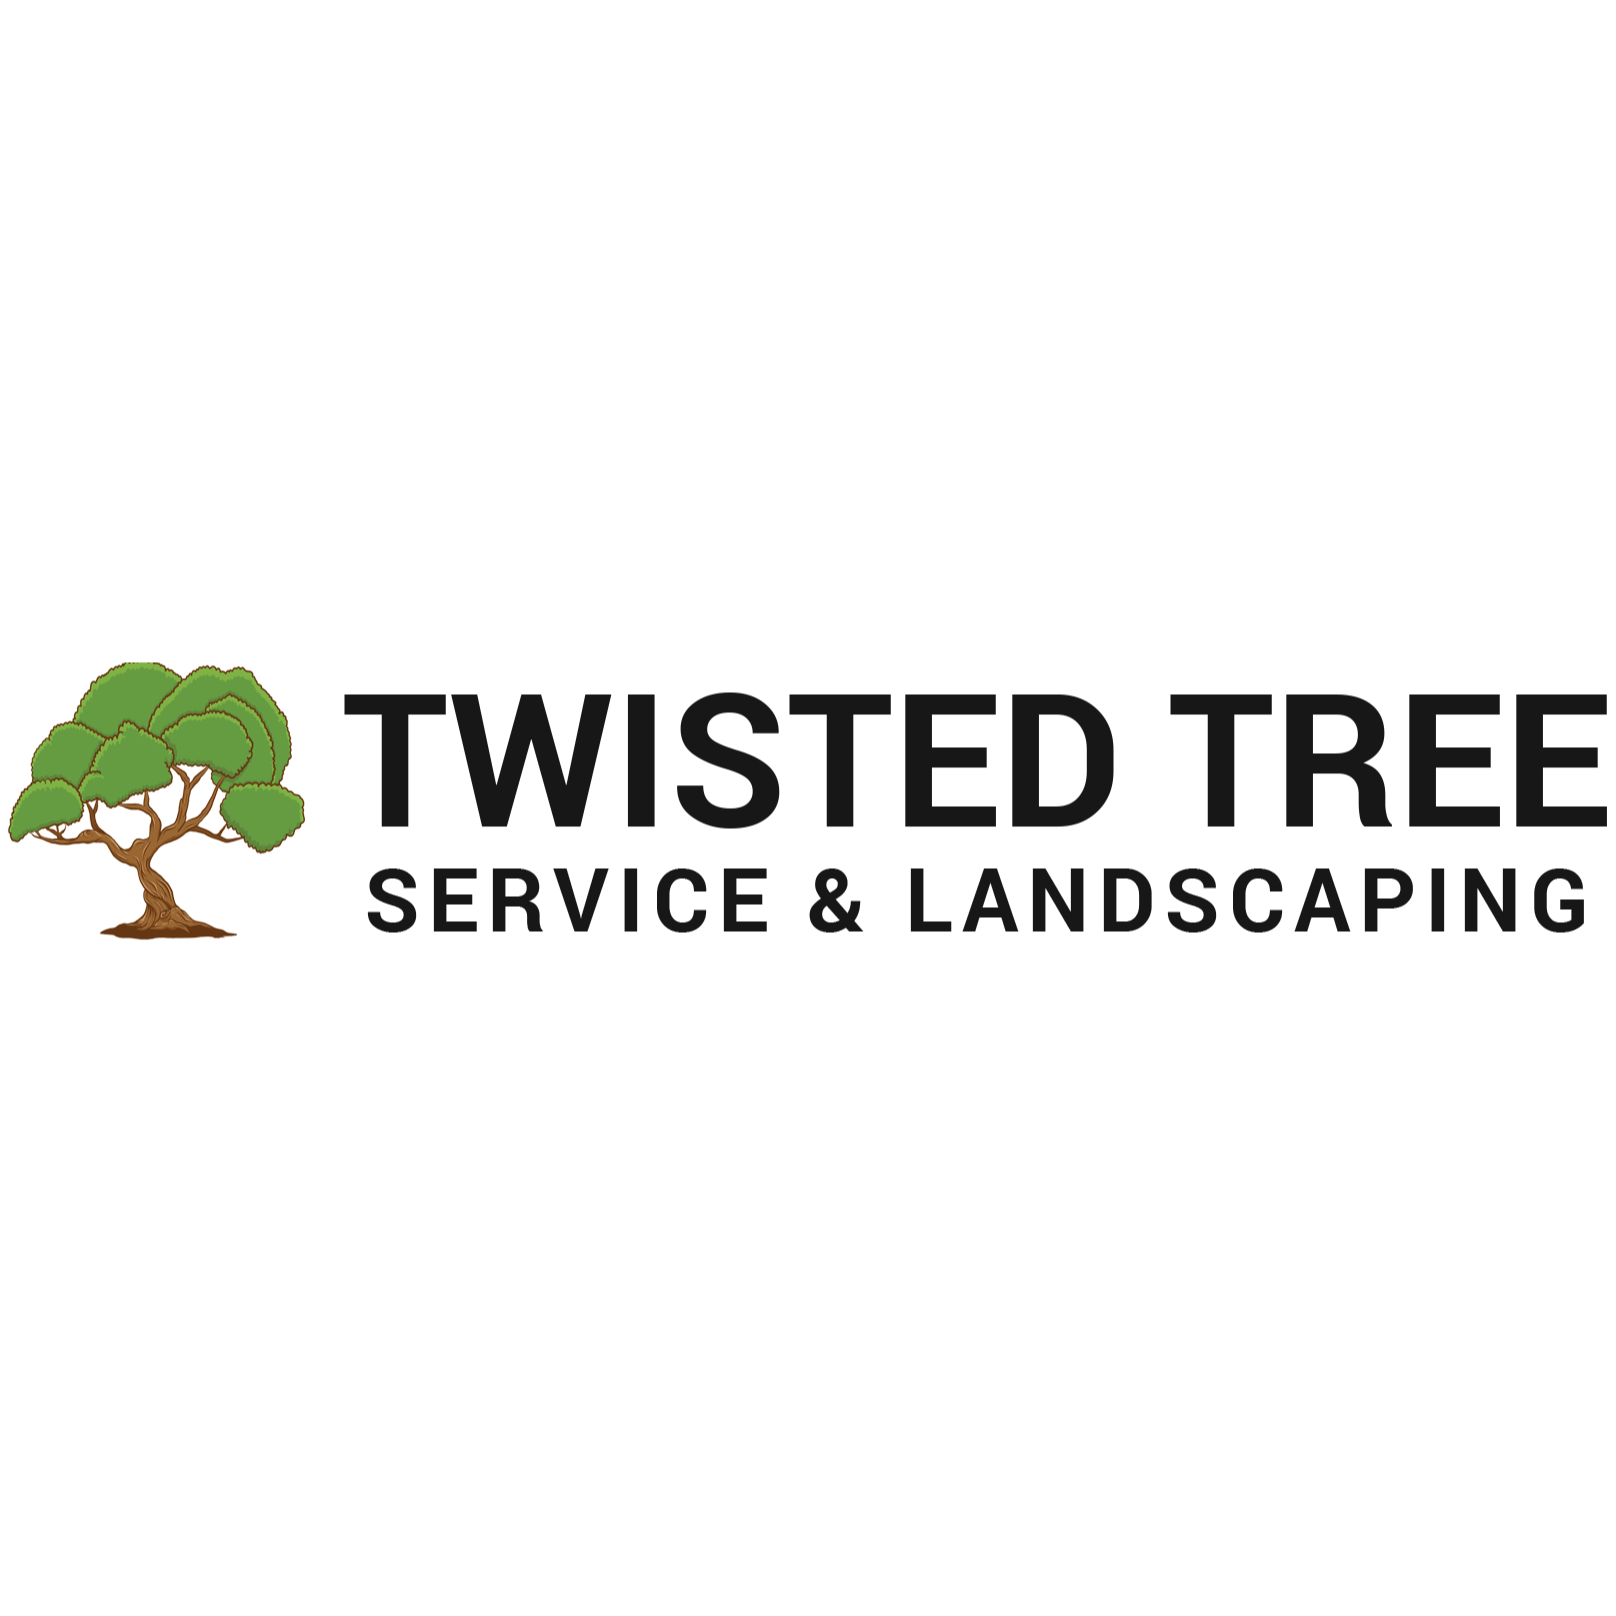 Twisted Tree Service & Landscaping